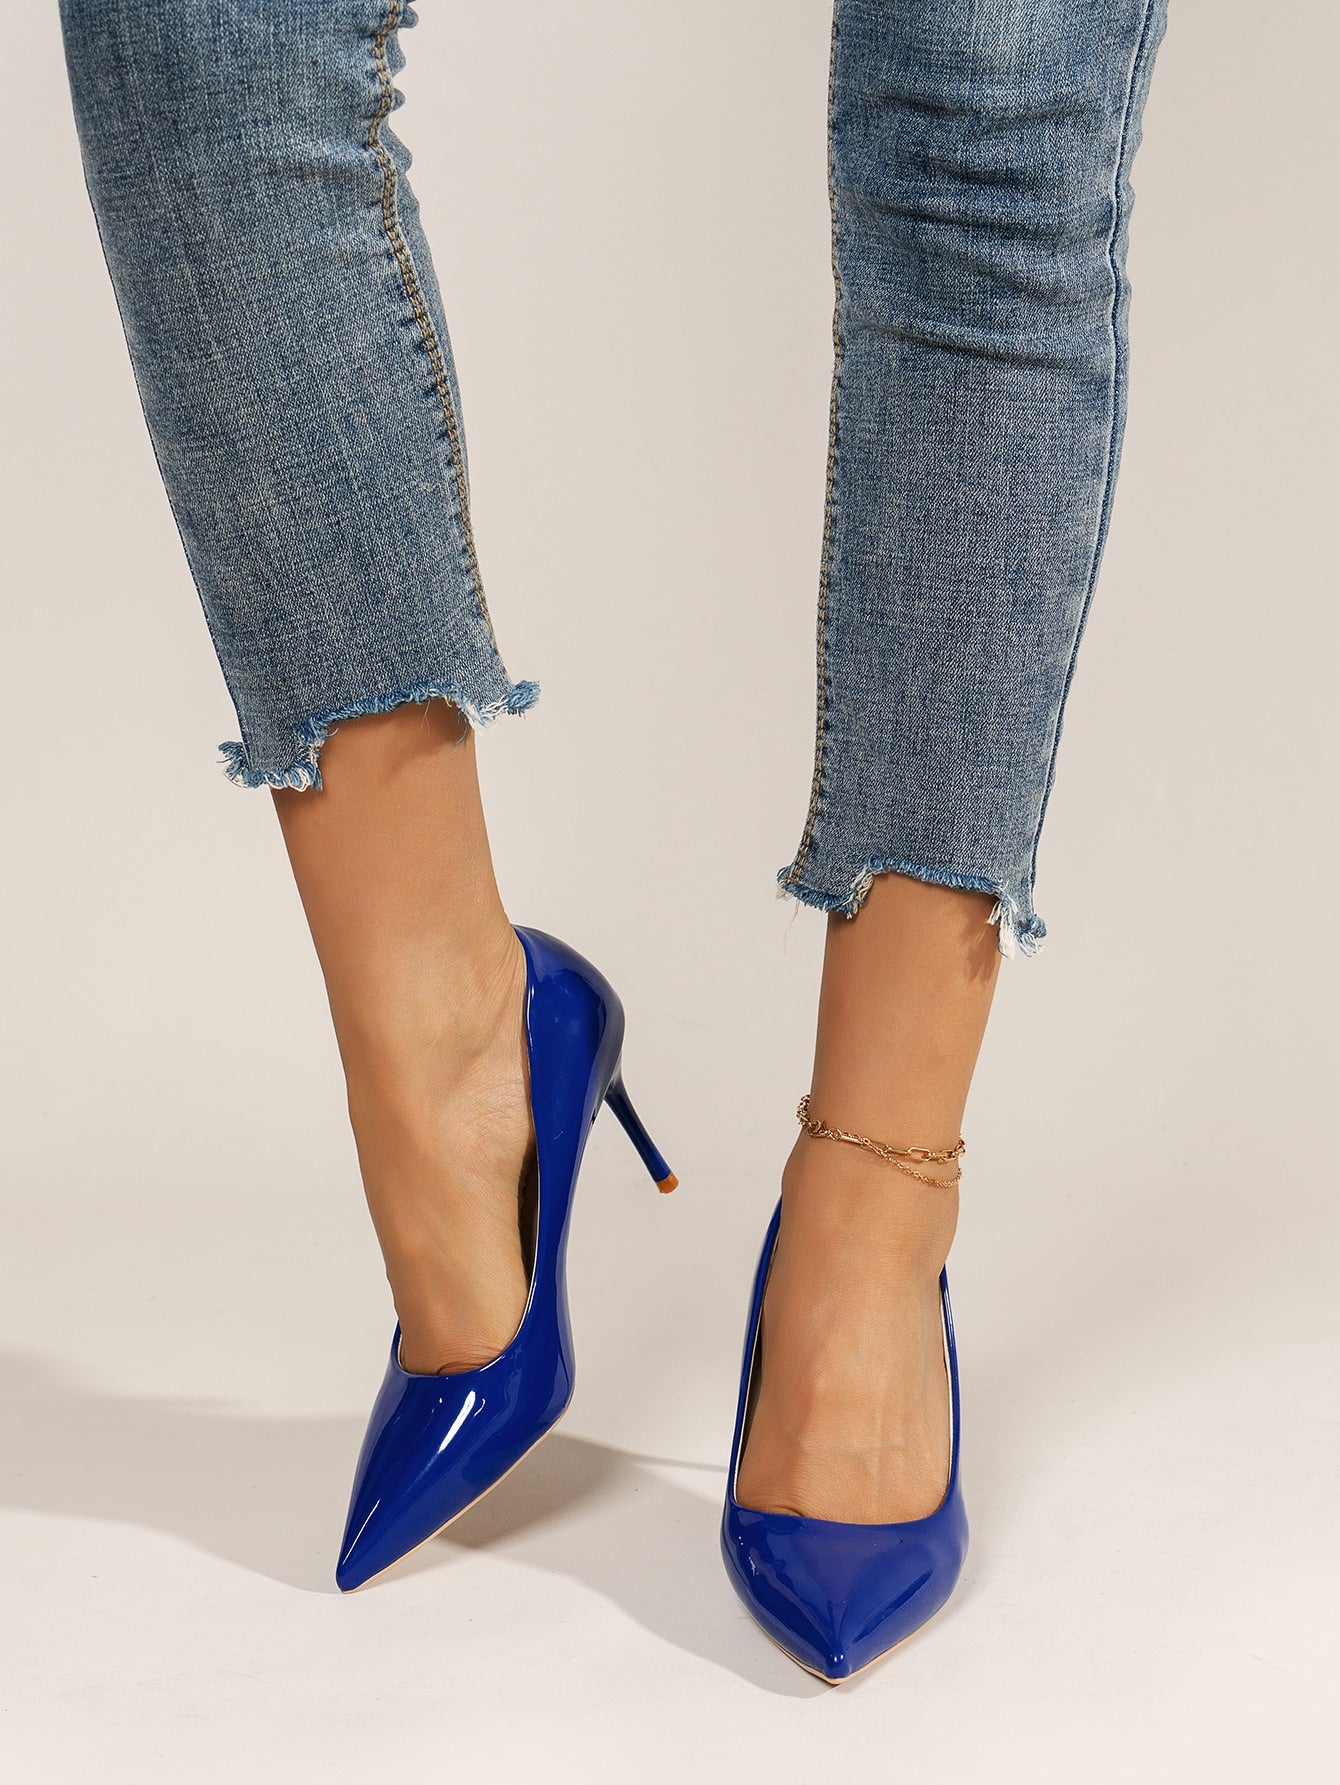 Stylish Pointed Toe Pumps